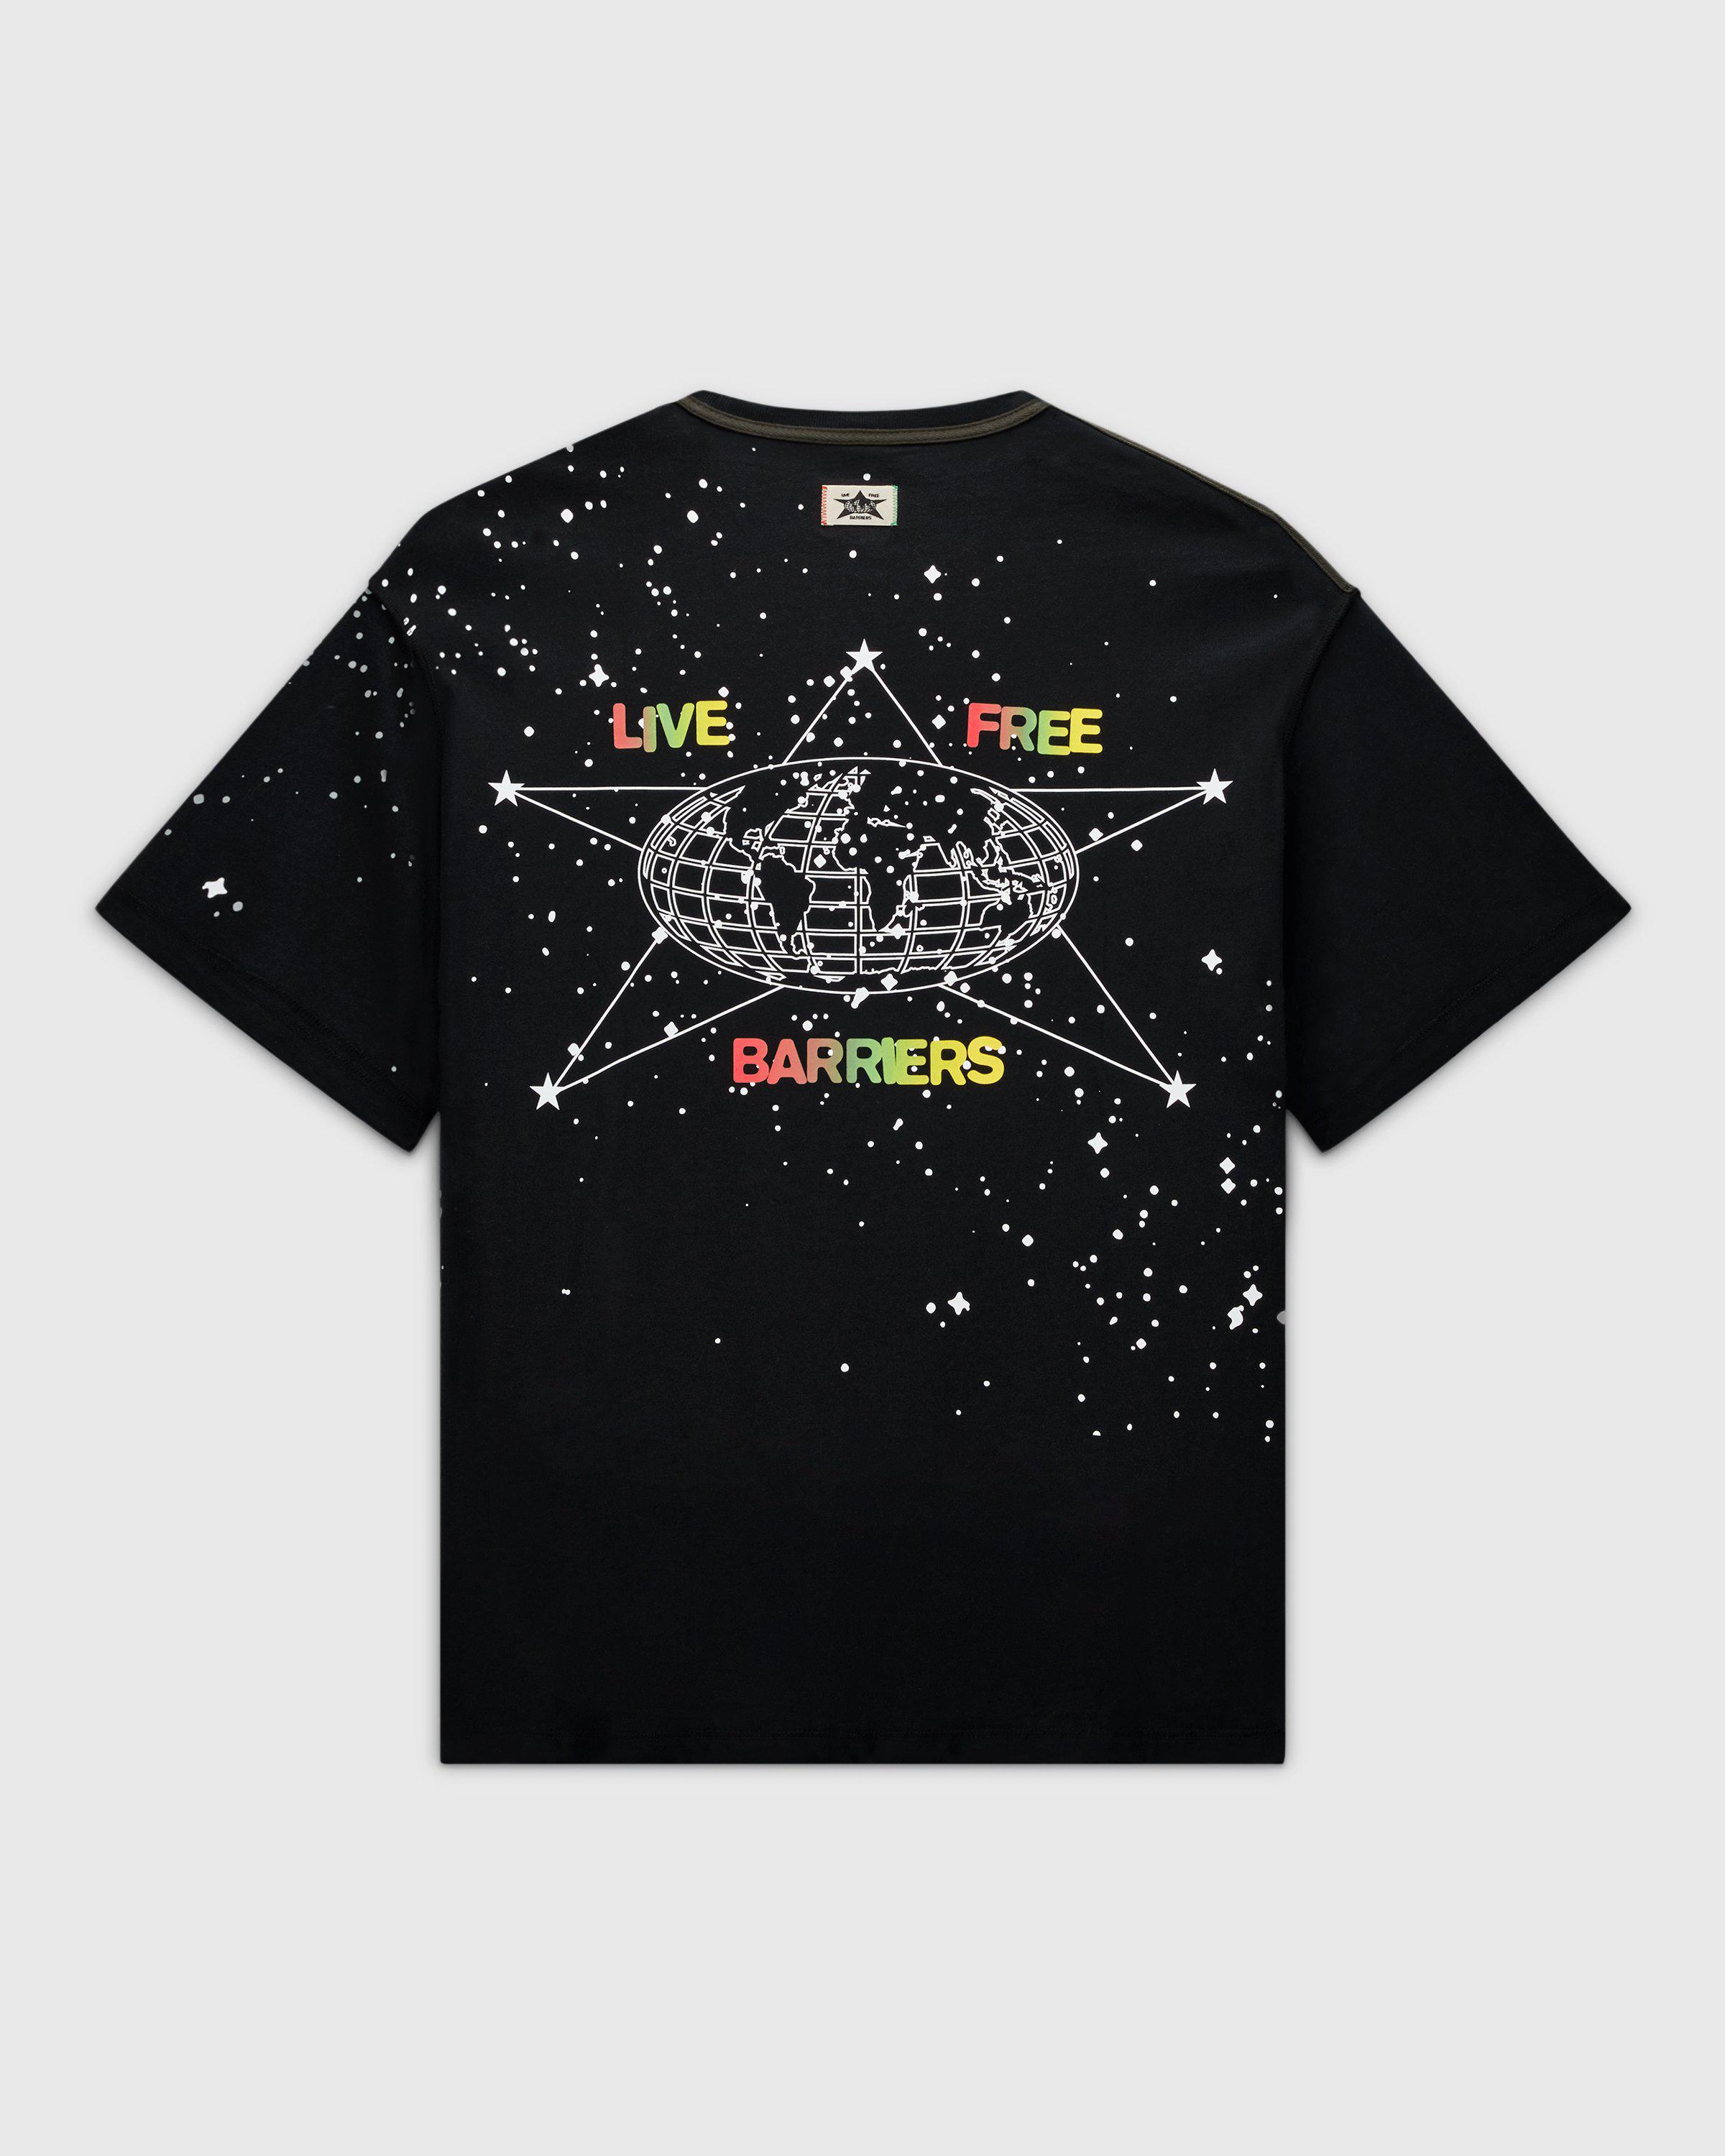 Converse x Barriers – Court Ready Crossover Tee Black by CONVERSE X BARRIERS